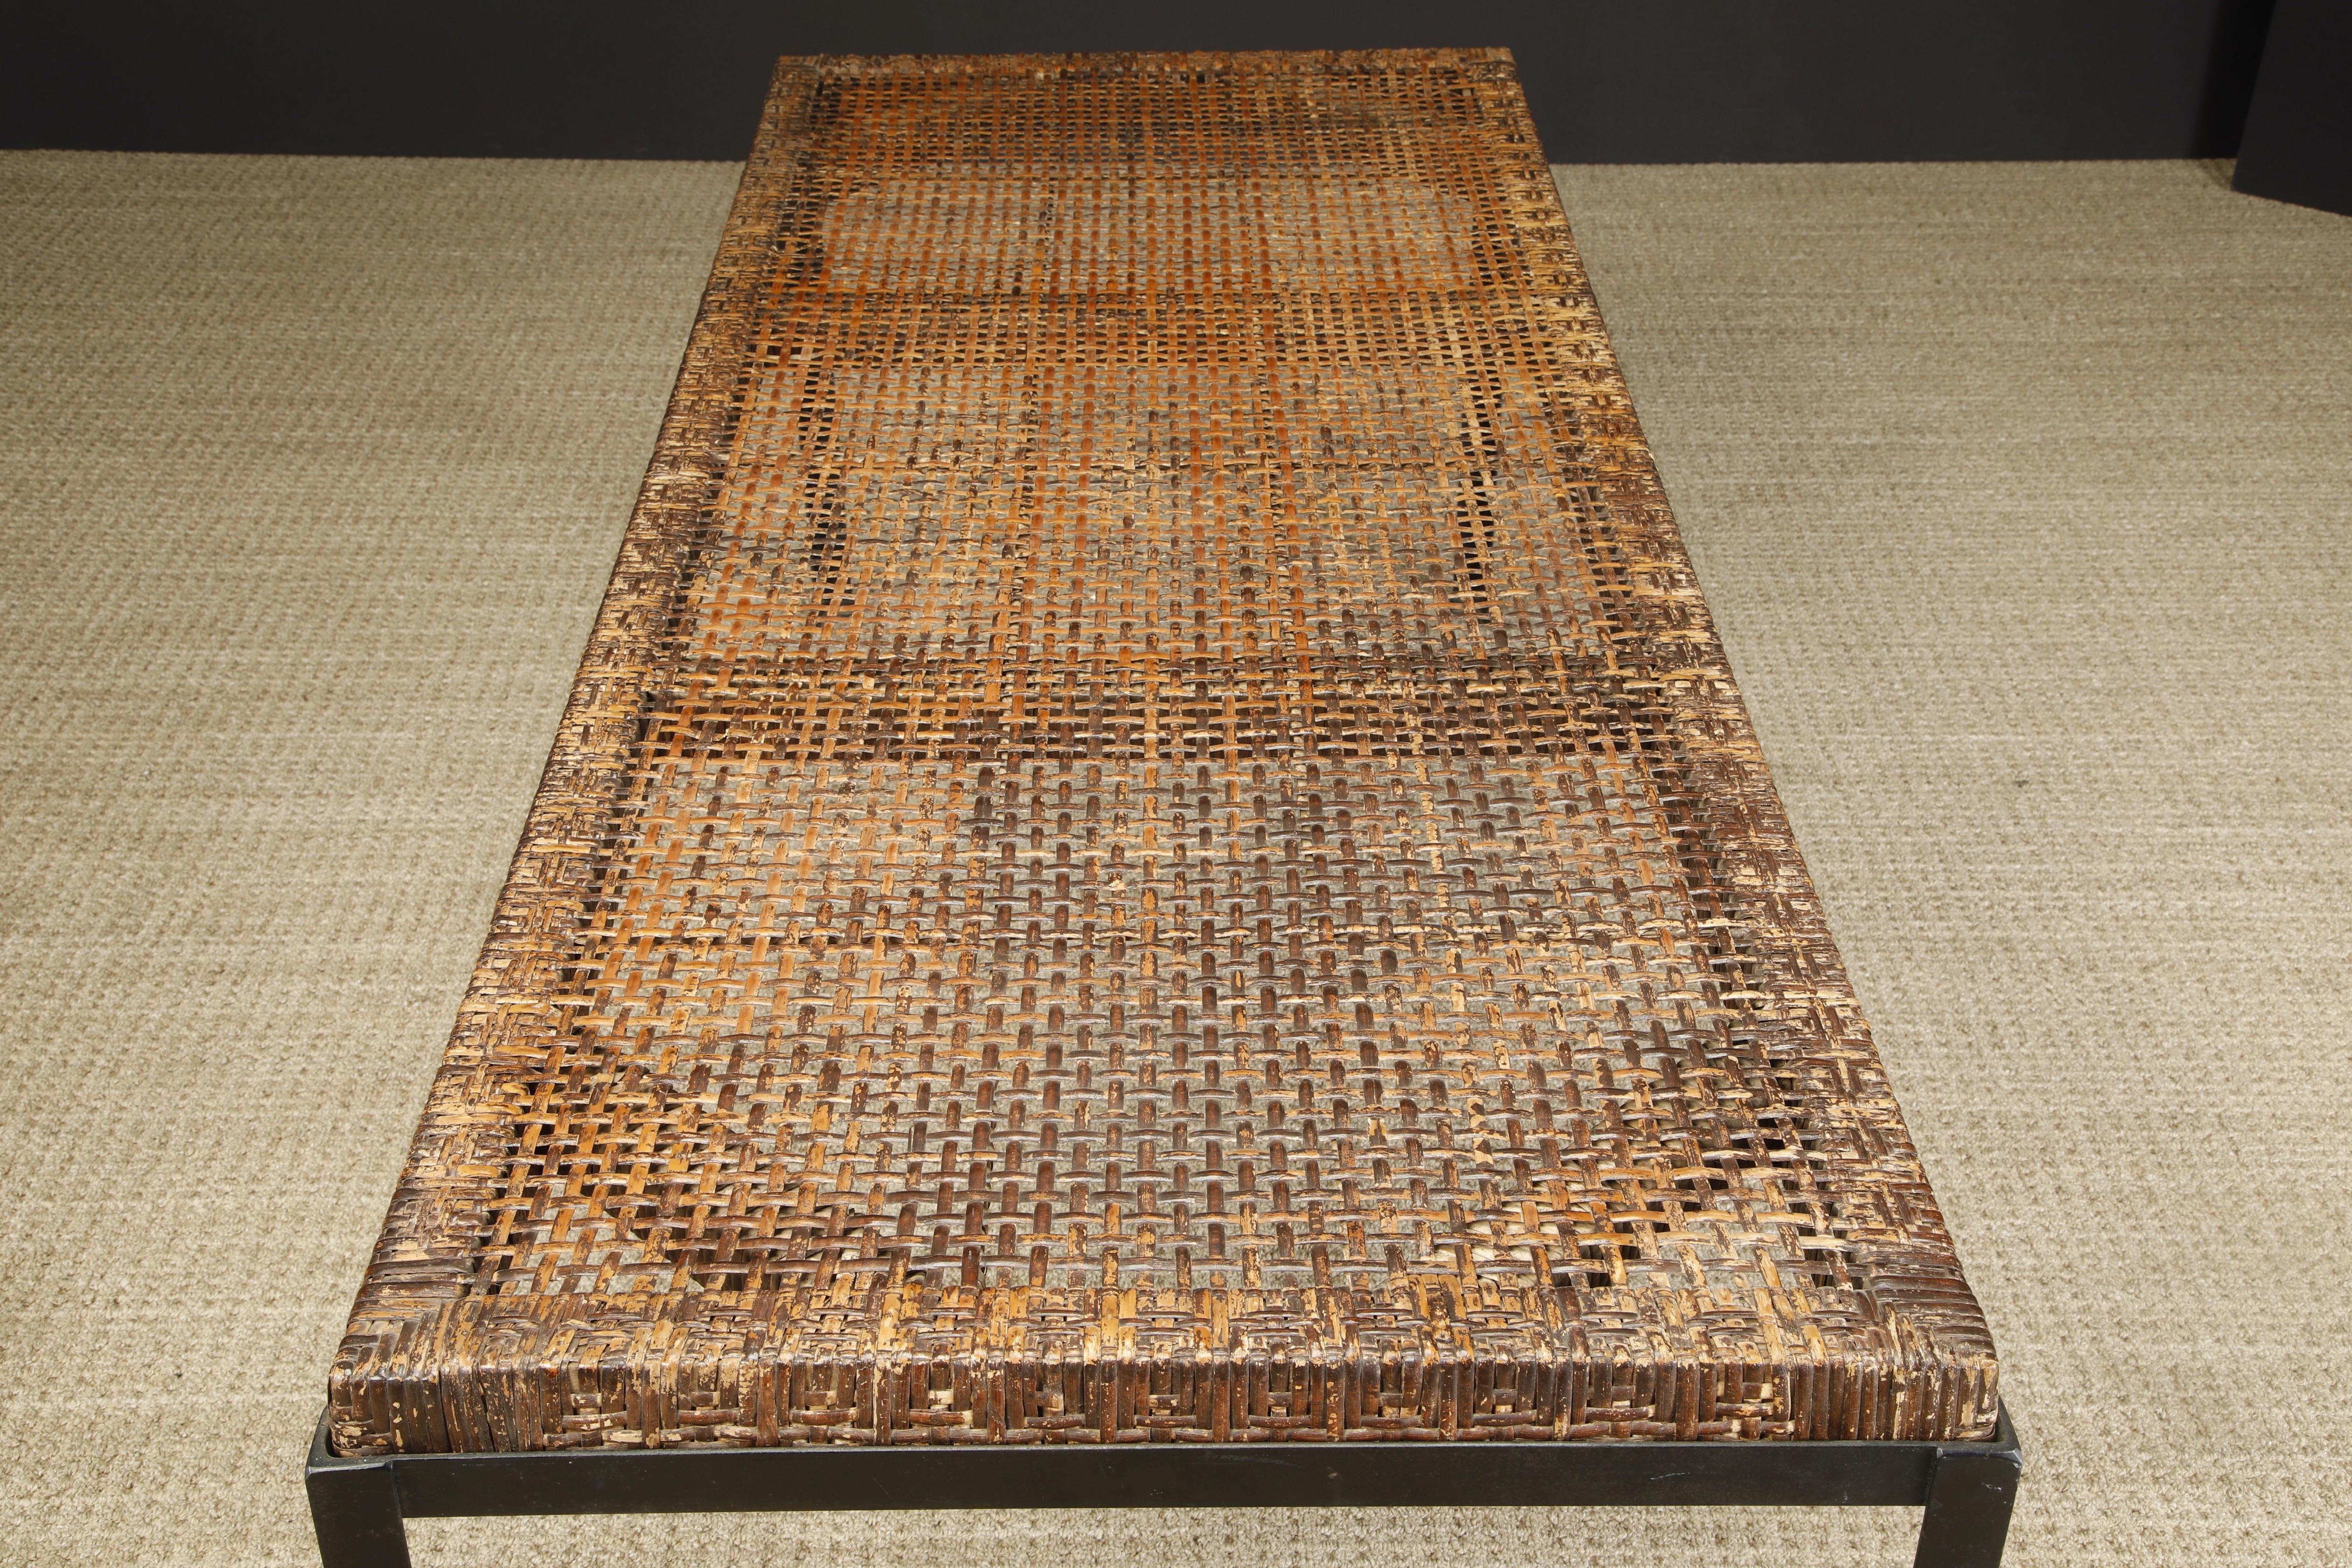 Caned Dining Table by Danny Ho Fong for Tropi-cal in Iron and Rattan, c 1960s For Sale 11